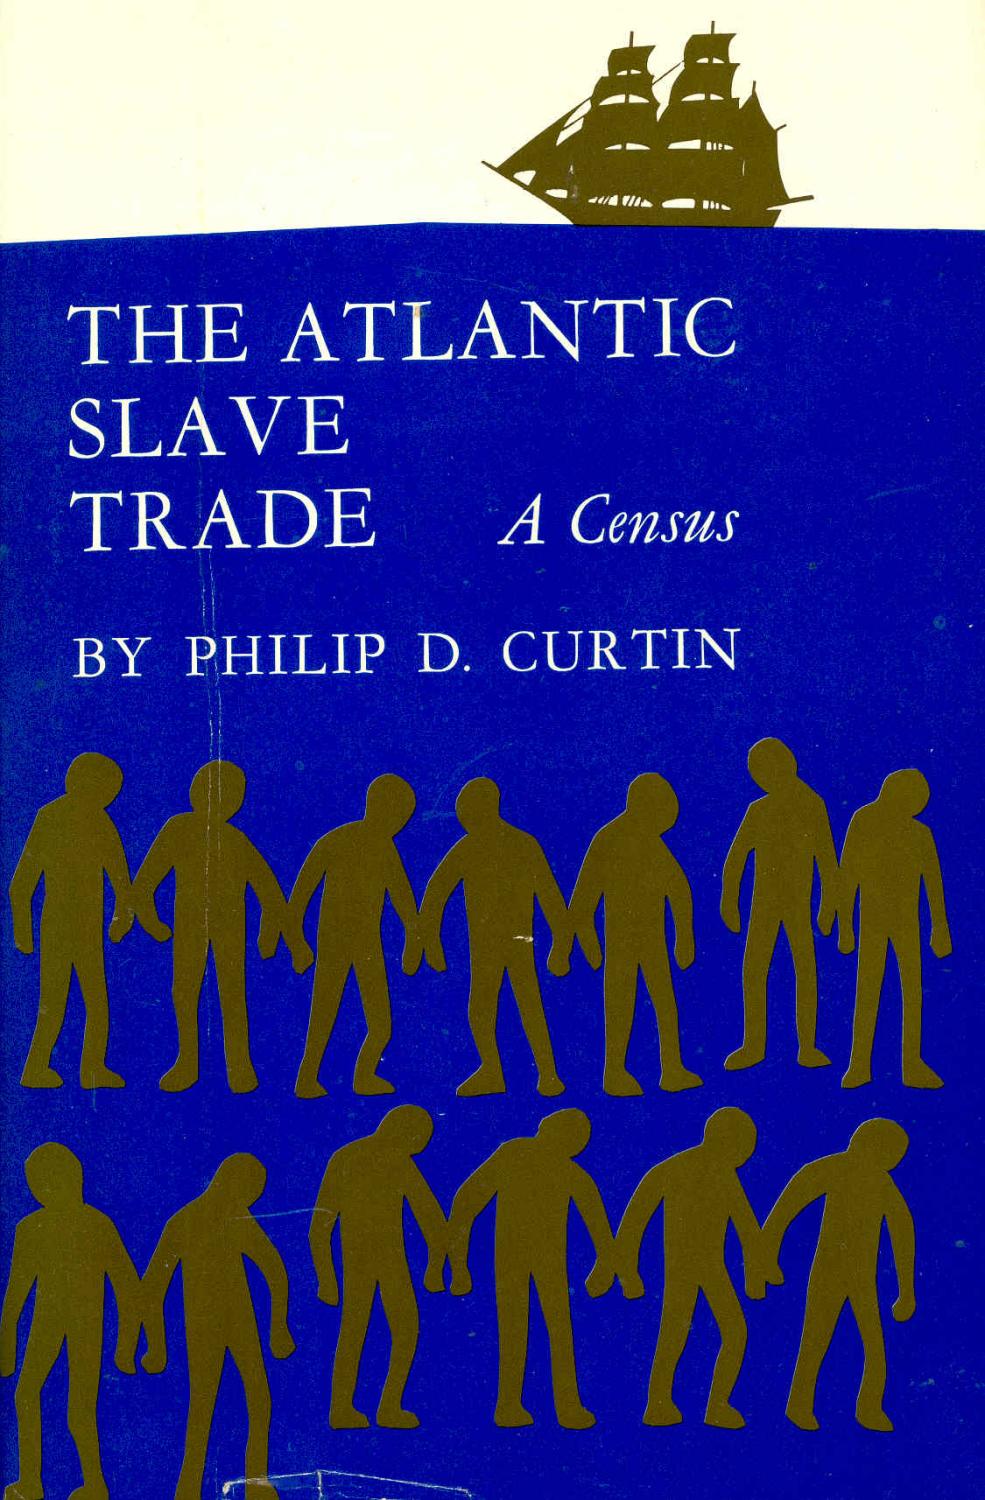 The Atlantic Slave Trade : A Census. [The Hispanic Trade -- The Colonies of the North Europeans -- The Fifteenth Sixteenth and Seventeenth Centuries -- The English Slave Trade of the Eighteenth Century -- The French Slave Trade of the Eighteenth Century -- Main Currents of the EighteenthCentury Slave Trade -- The Slave Trade of the Nineteenth Century -- Major Trends -- A Postscript on Mortality -- Koelles Linguistic Inventory -- Bibliography - Curtin, Philip D.